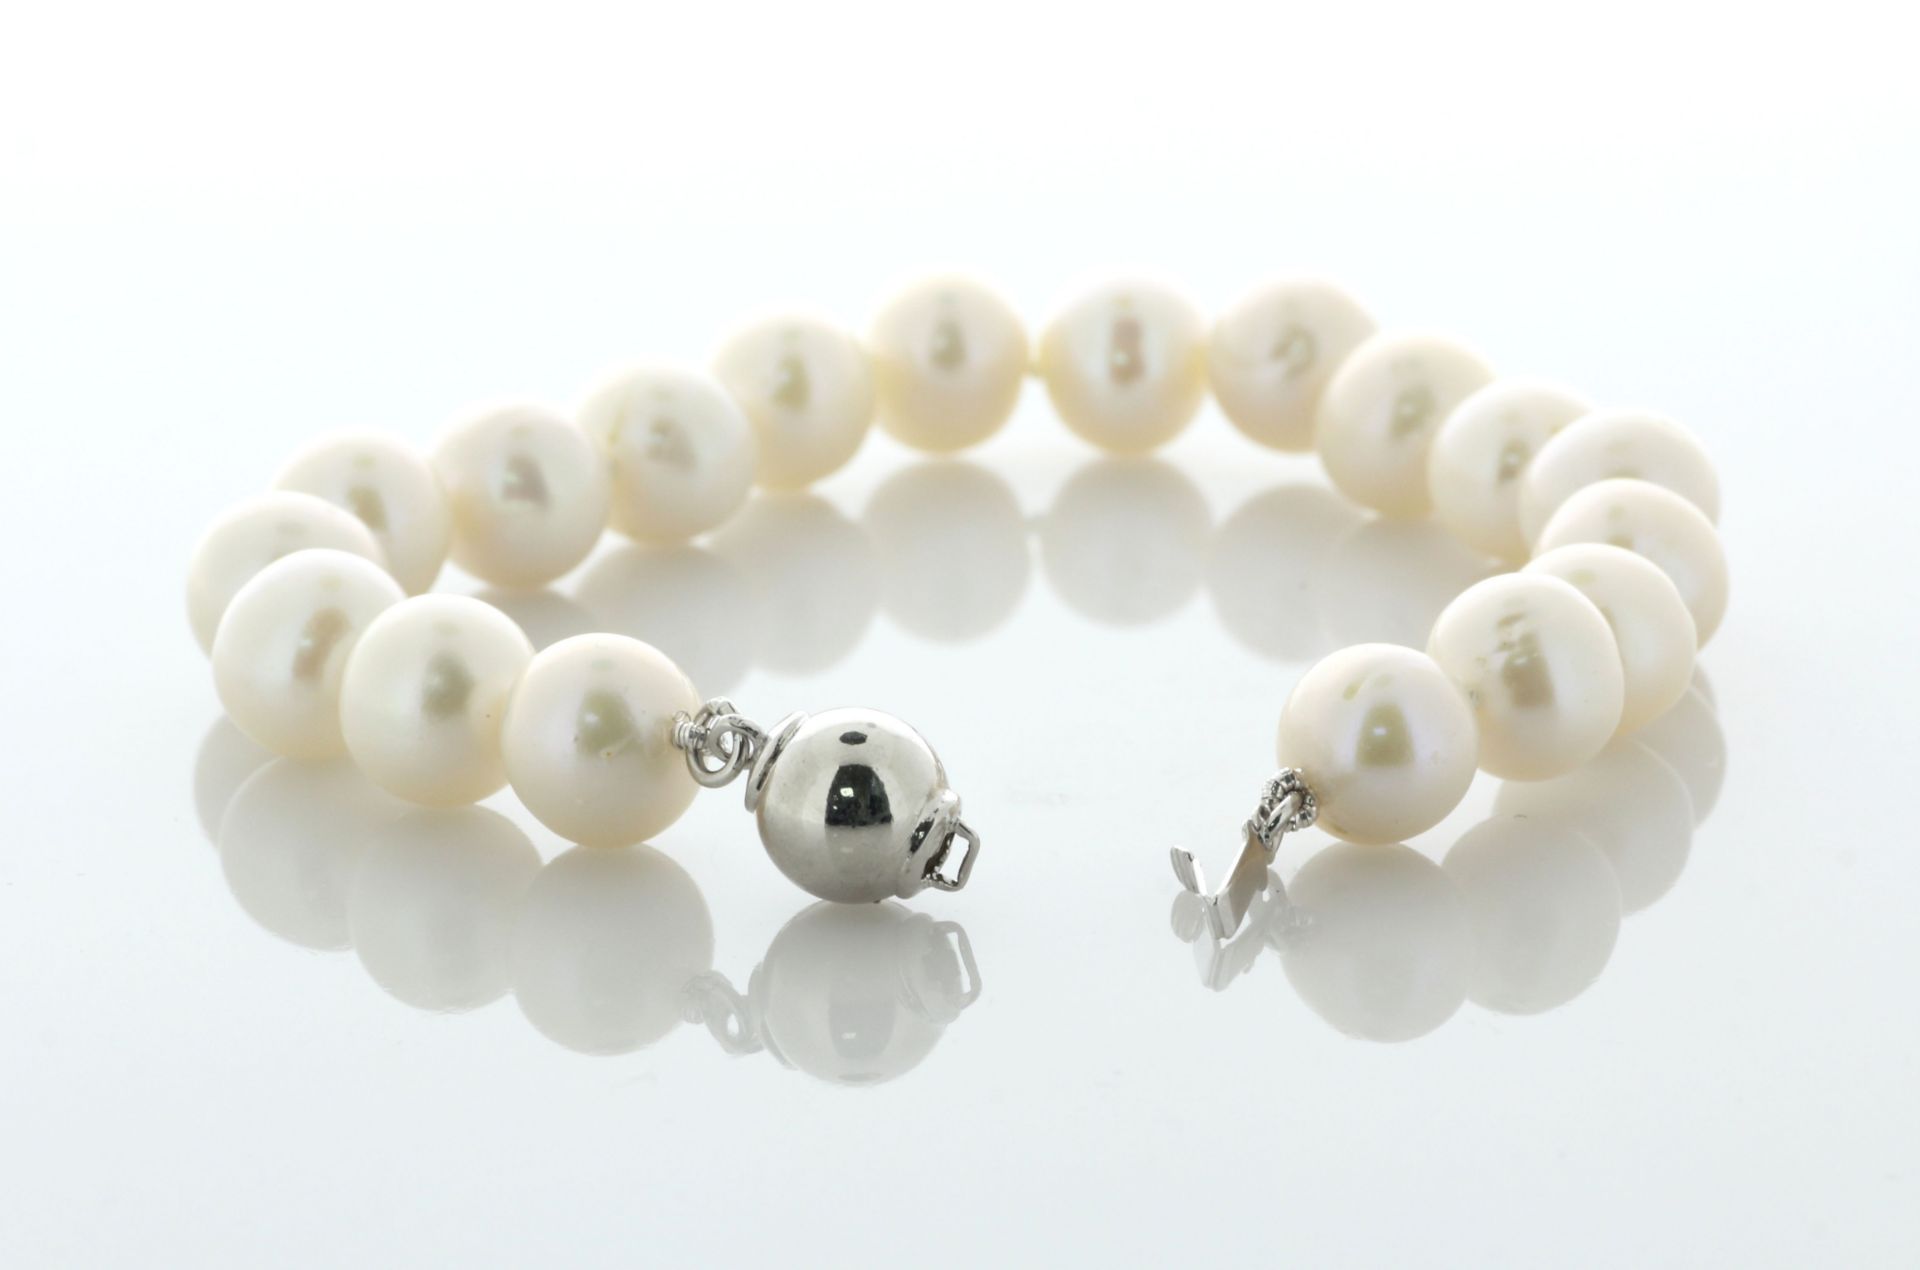 6.5 Inches Freshwater Cultured 8.5 - 9.0mm Pearl Bracelet With Silver Clasp - Valued By AGI £285. - Image 3 of 4